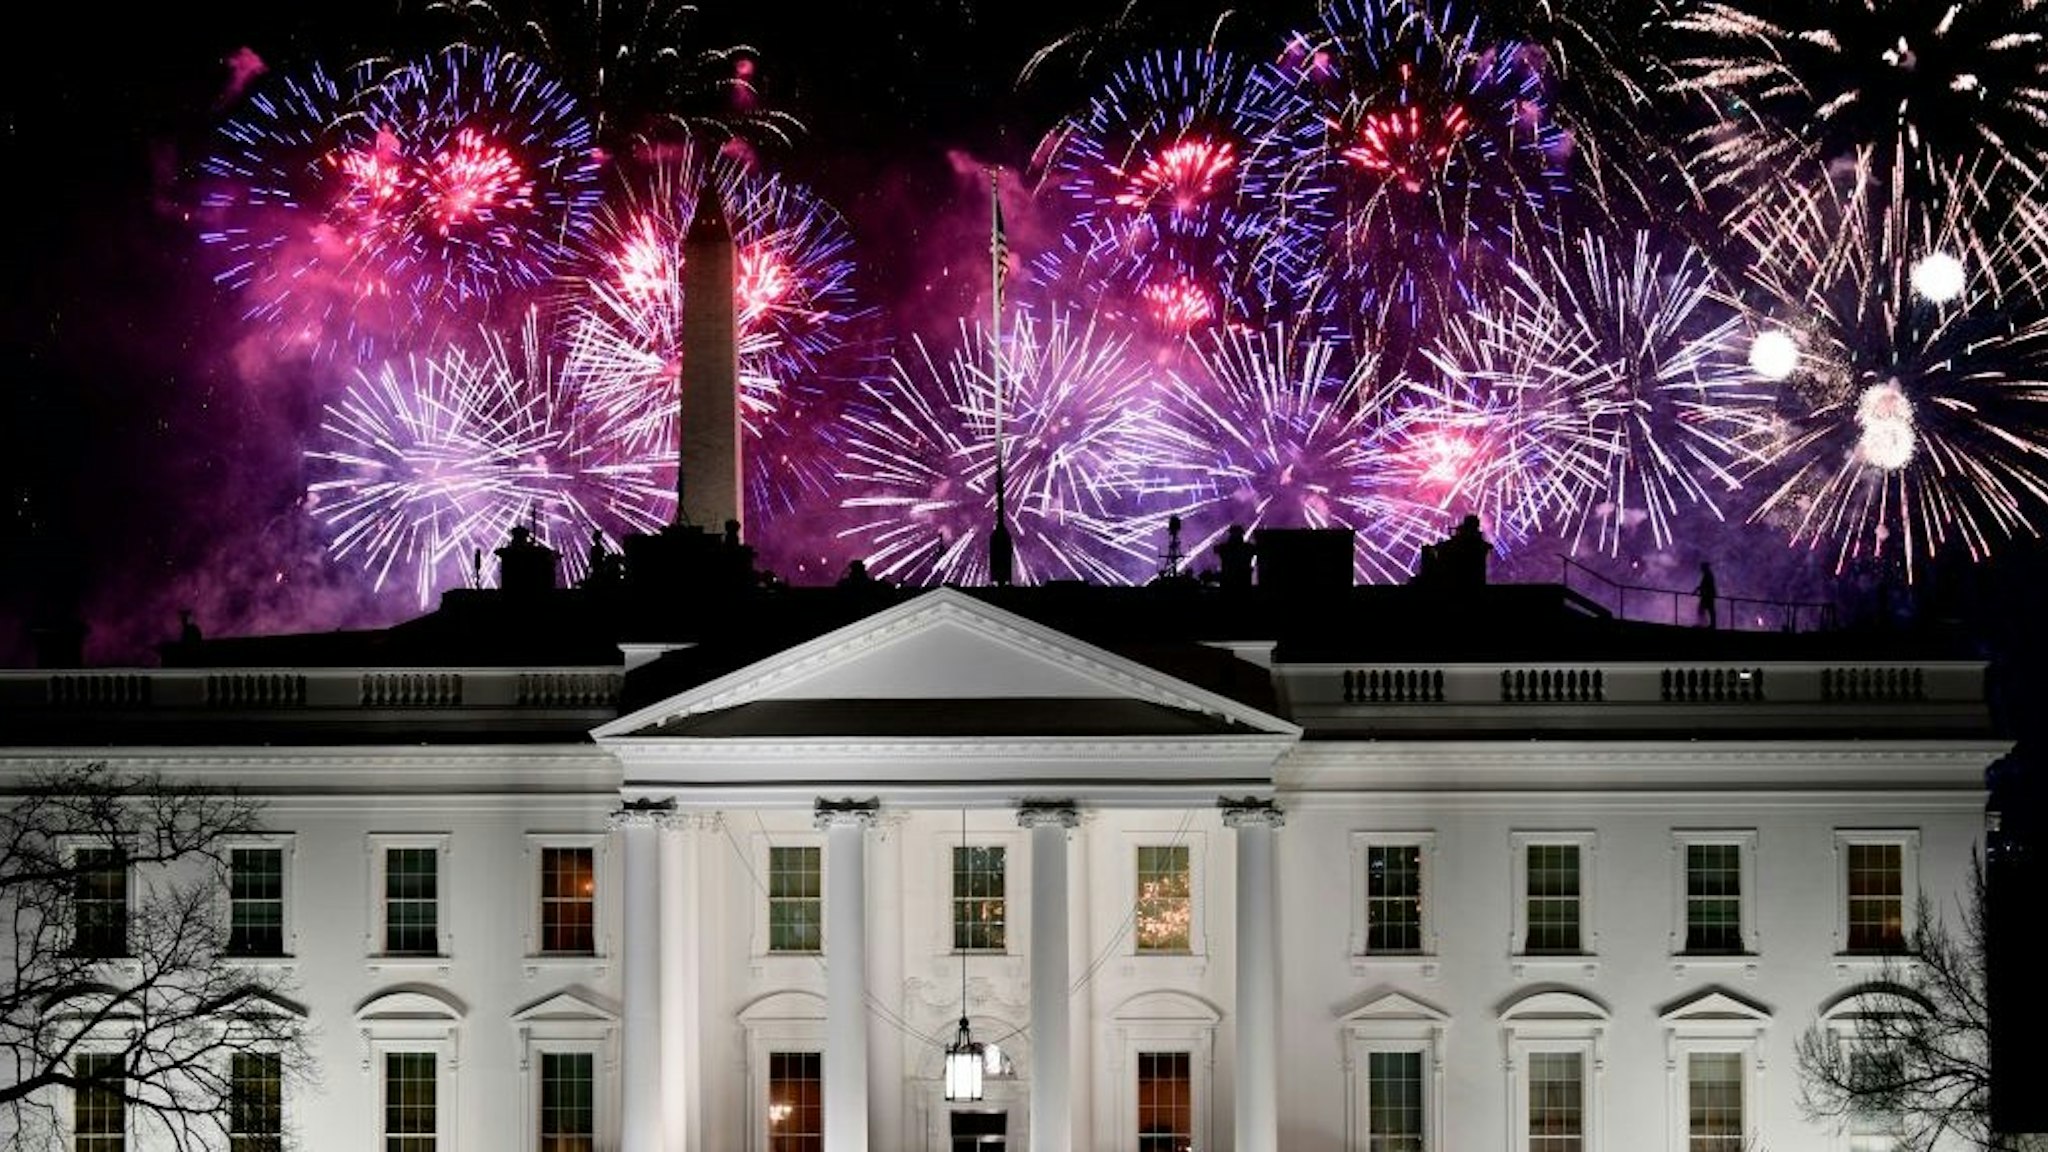 TOPSHOT - Fireworks are seen above the White House, with US Secret Service members watching from its roof, at the end of the Inauguration day for US President Joe Biden in Washington, DC, on January 20, 2021. (Photo by Patrick T. FALLON / AFP) (Photo by